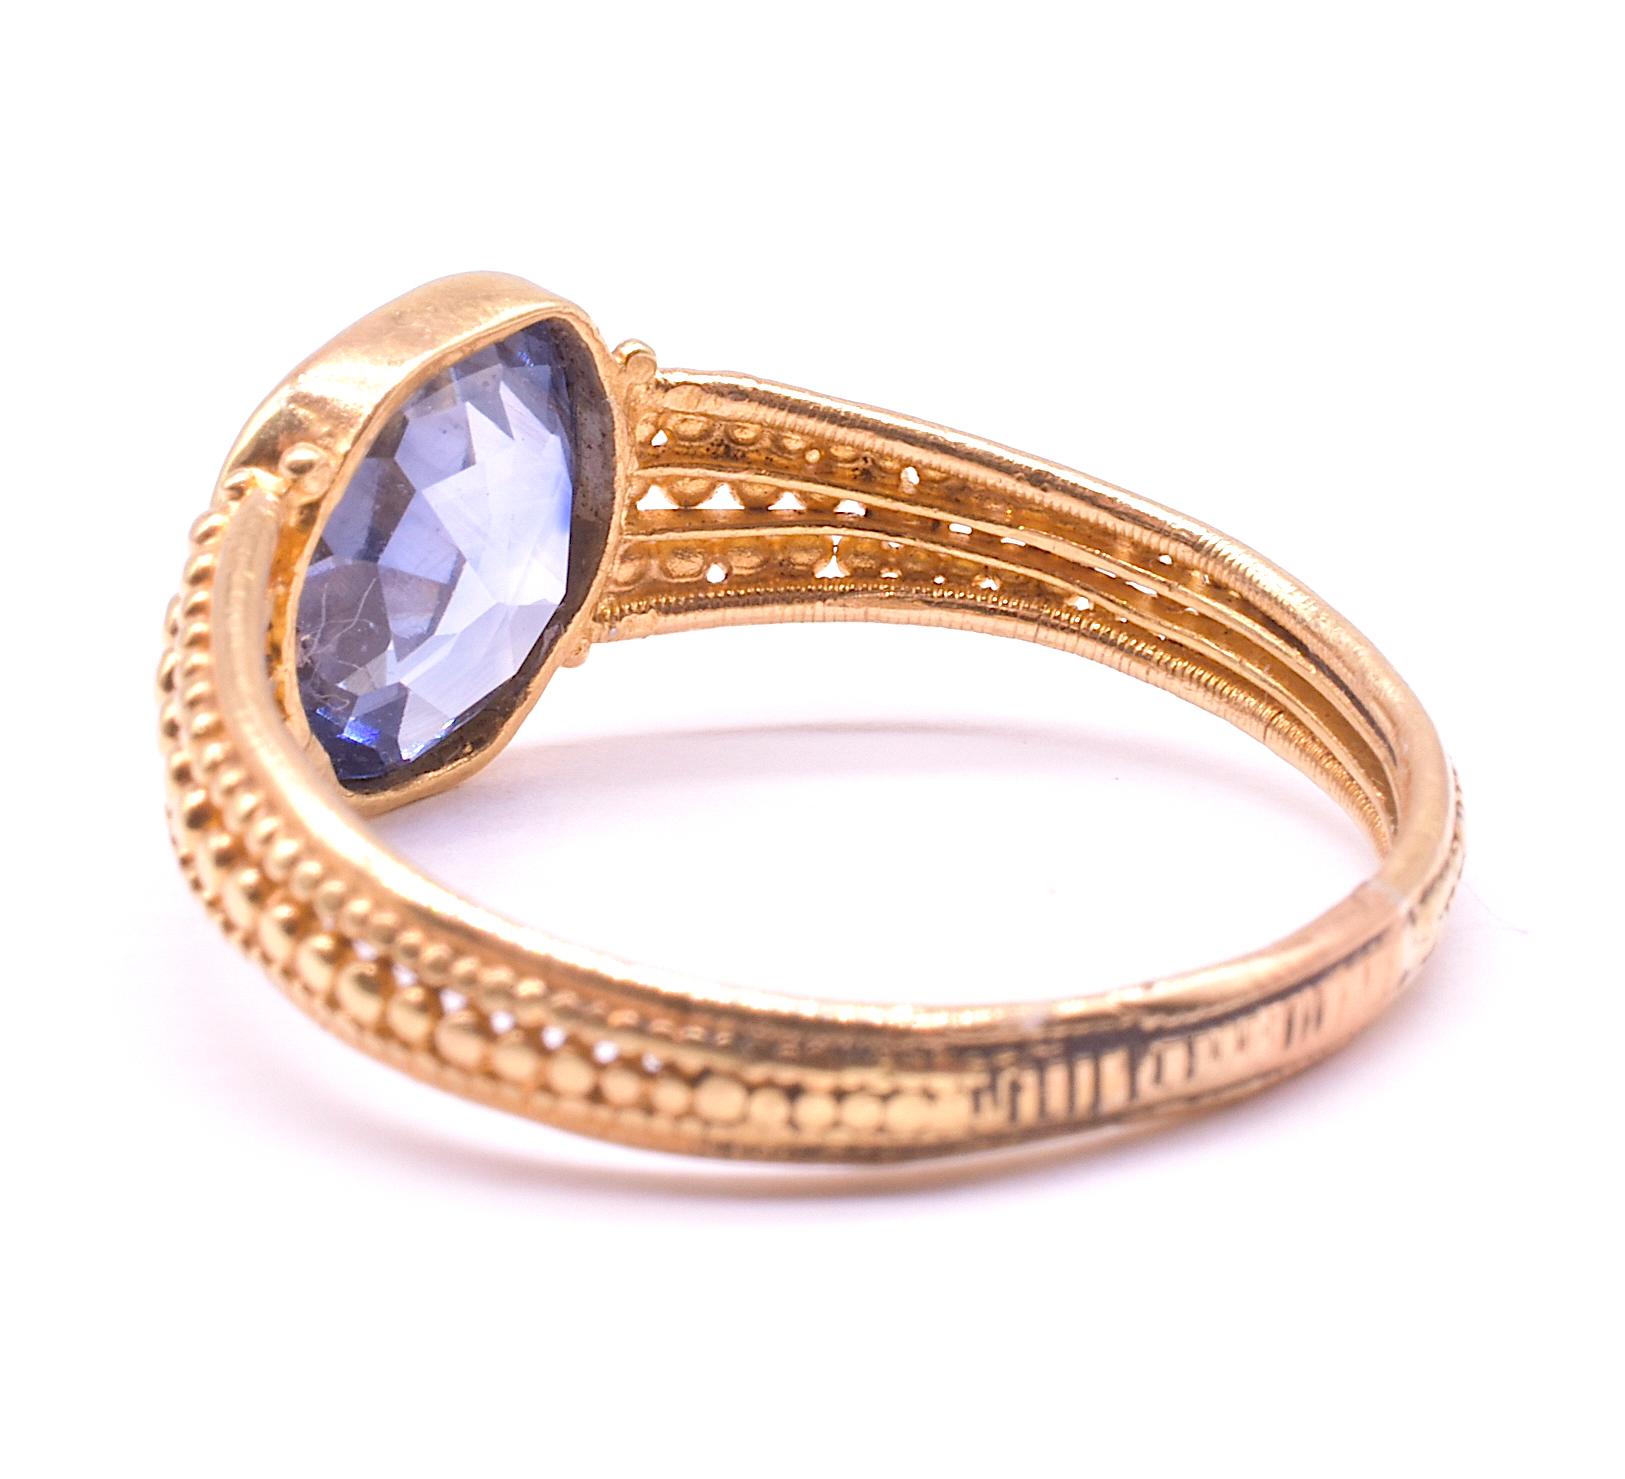 Women's C.1830 18K Heart Shaped Natural Sapphire Ring with Gold Beadwork